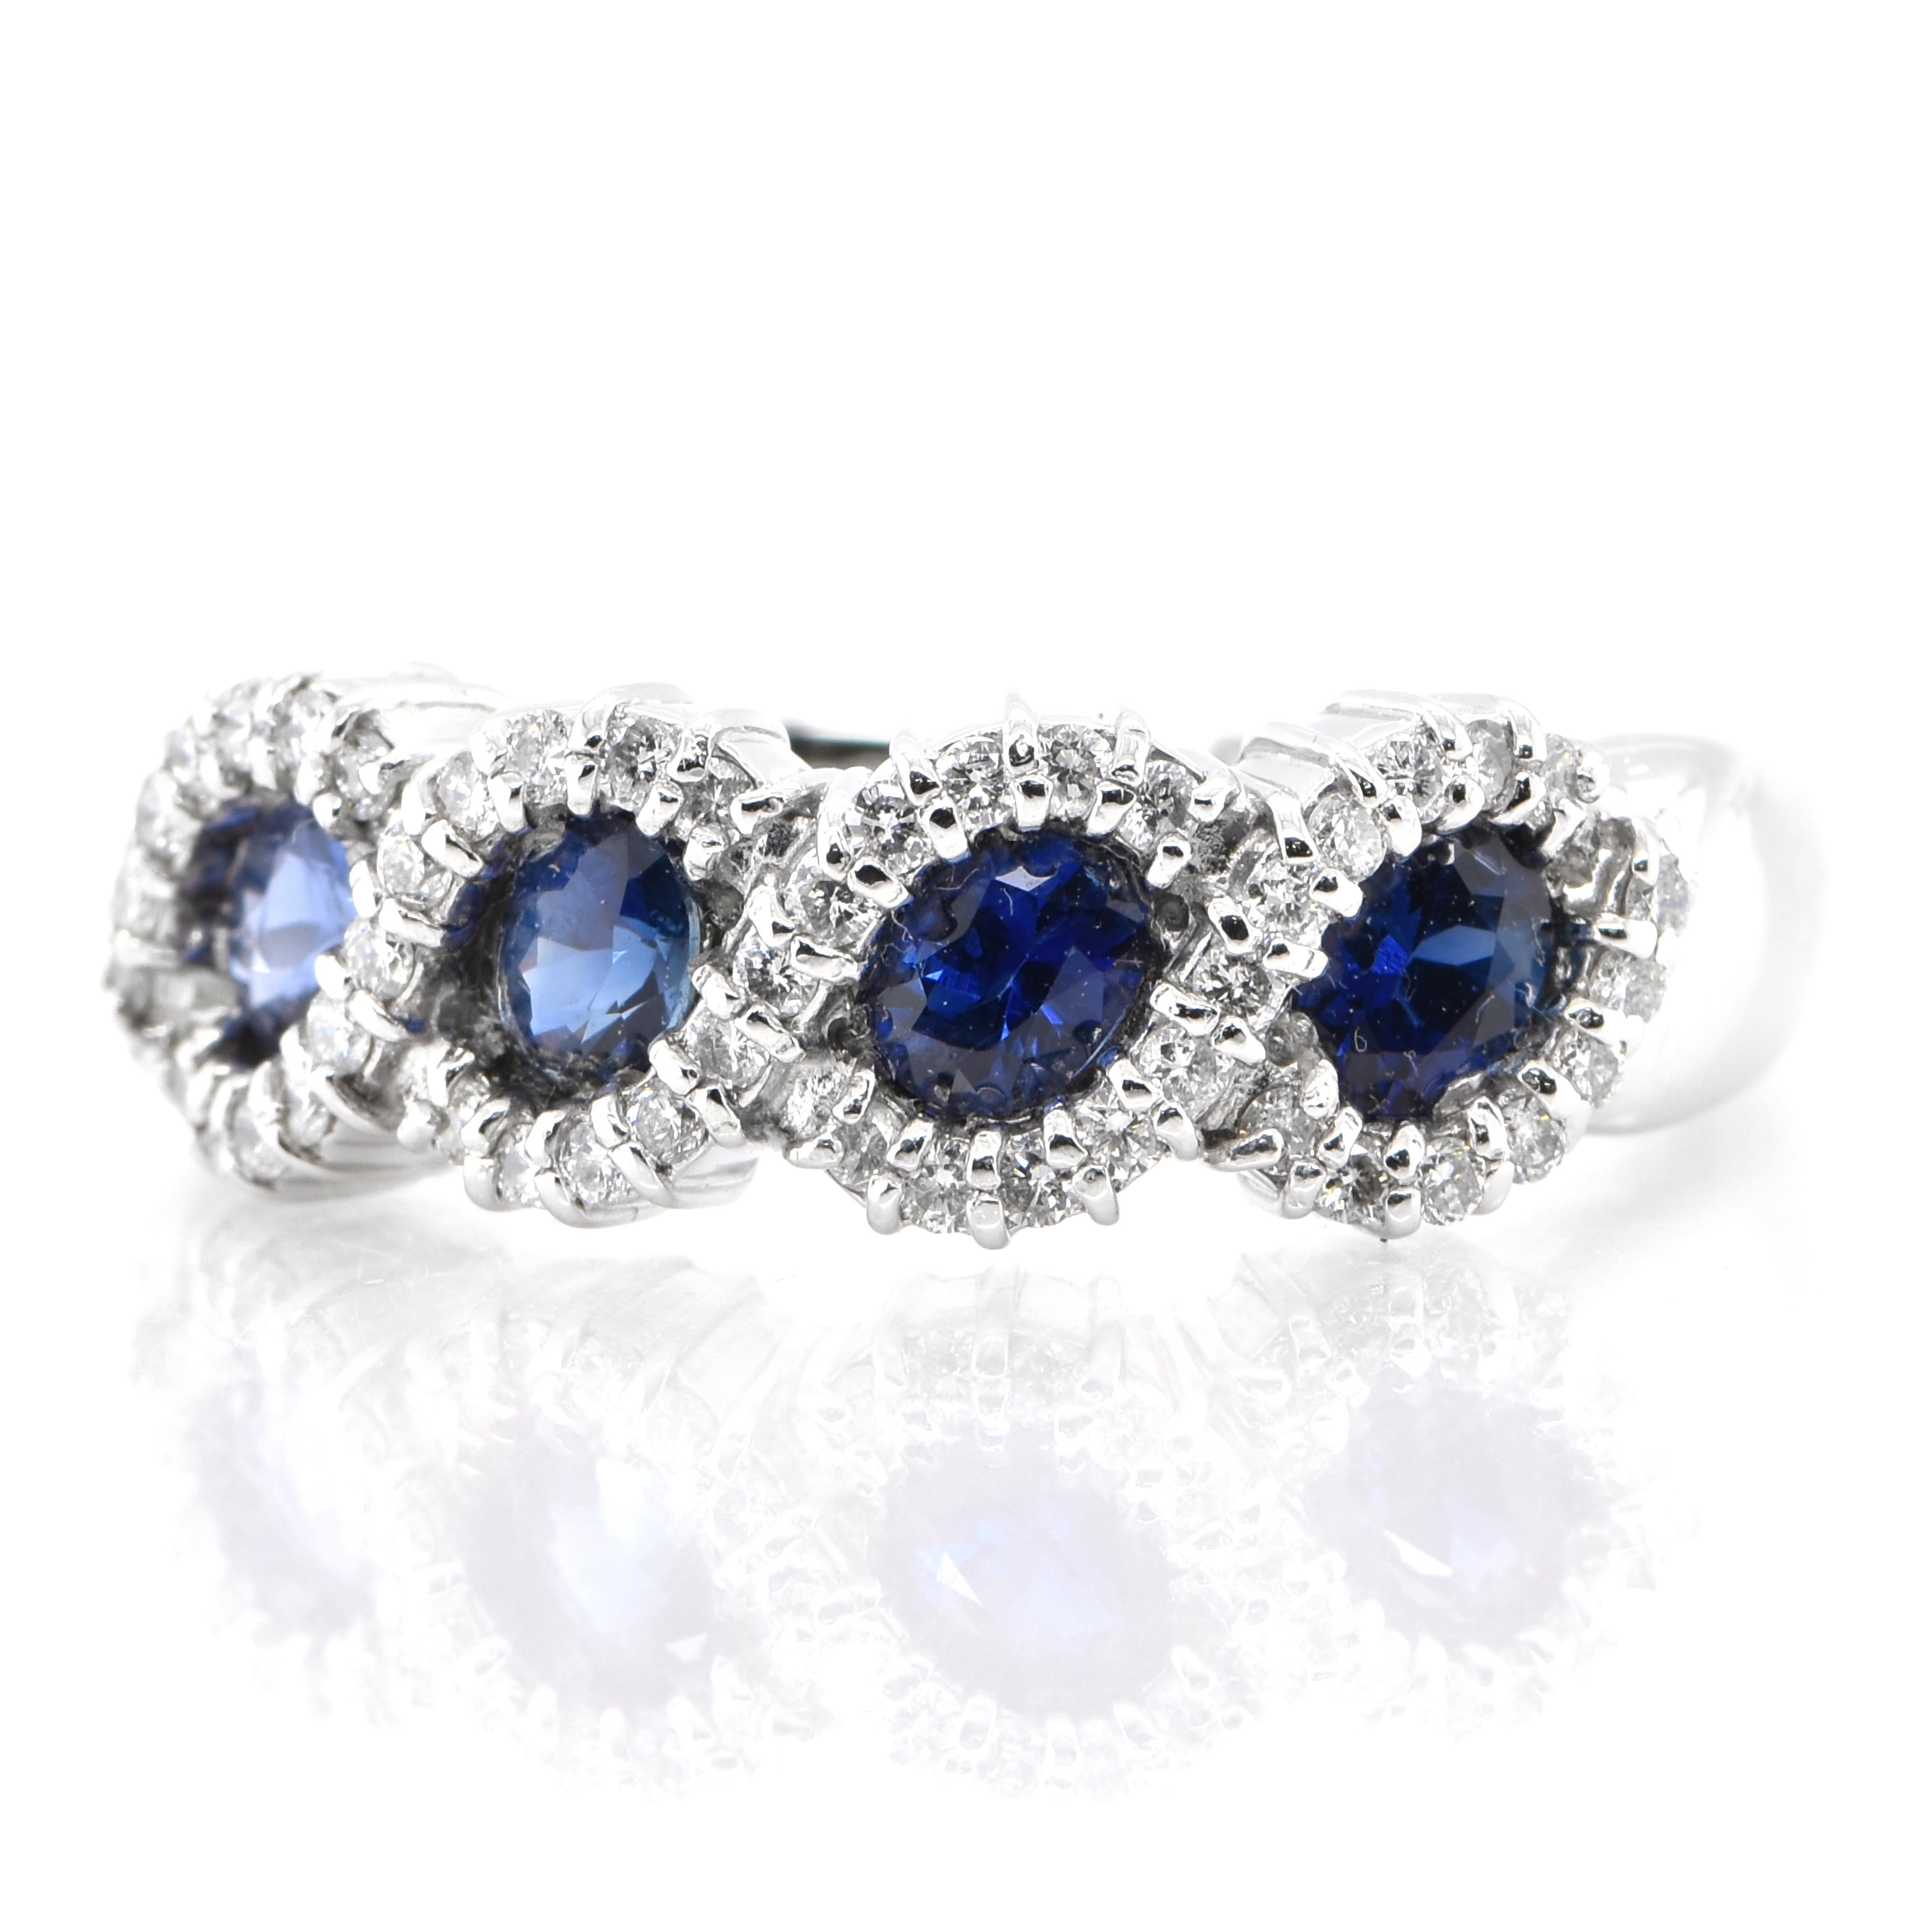 A beautiful half eternity band ring featuring 0.70 Carats Natural Sapphires and 0.30 Carats Diamond Accents set in Platinum. Sapphires have extraordinary durability - they excel in hardness as well as toughness and durability making them very